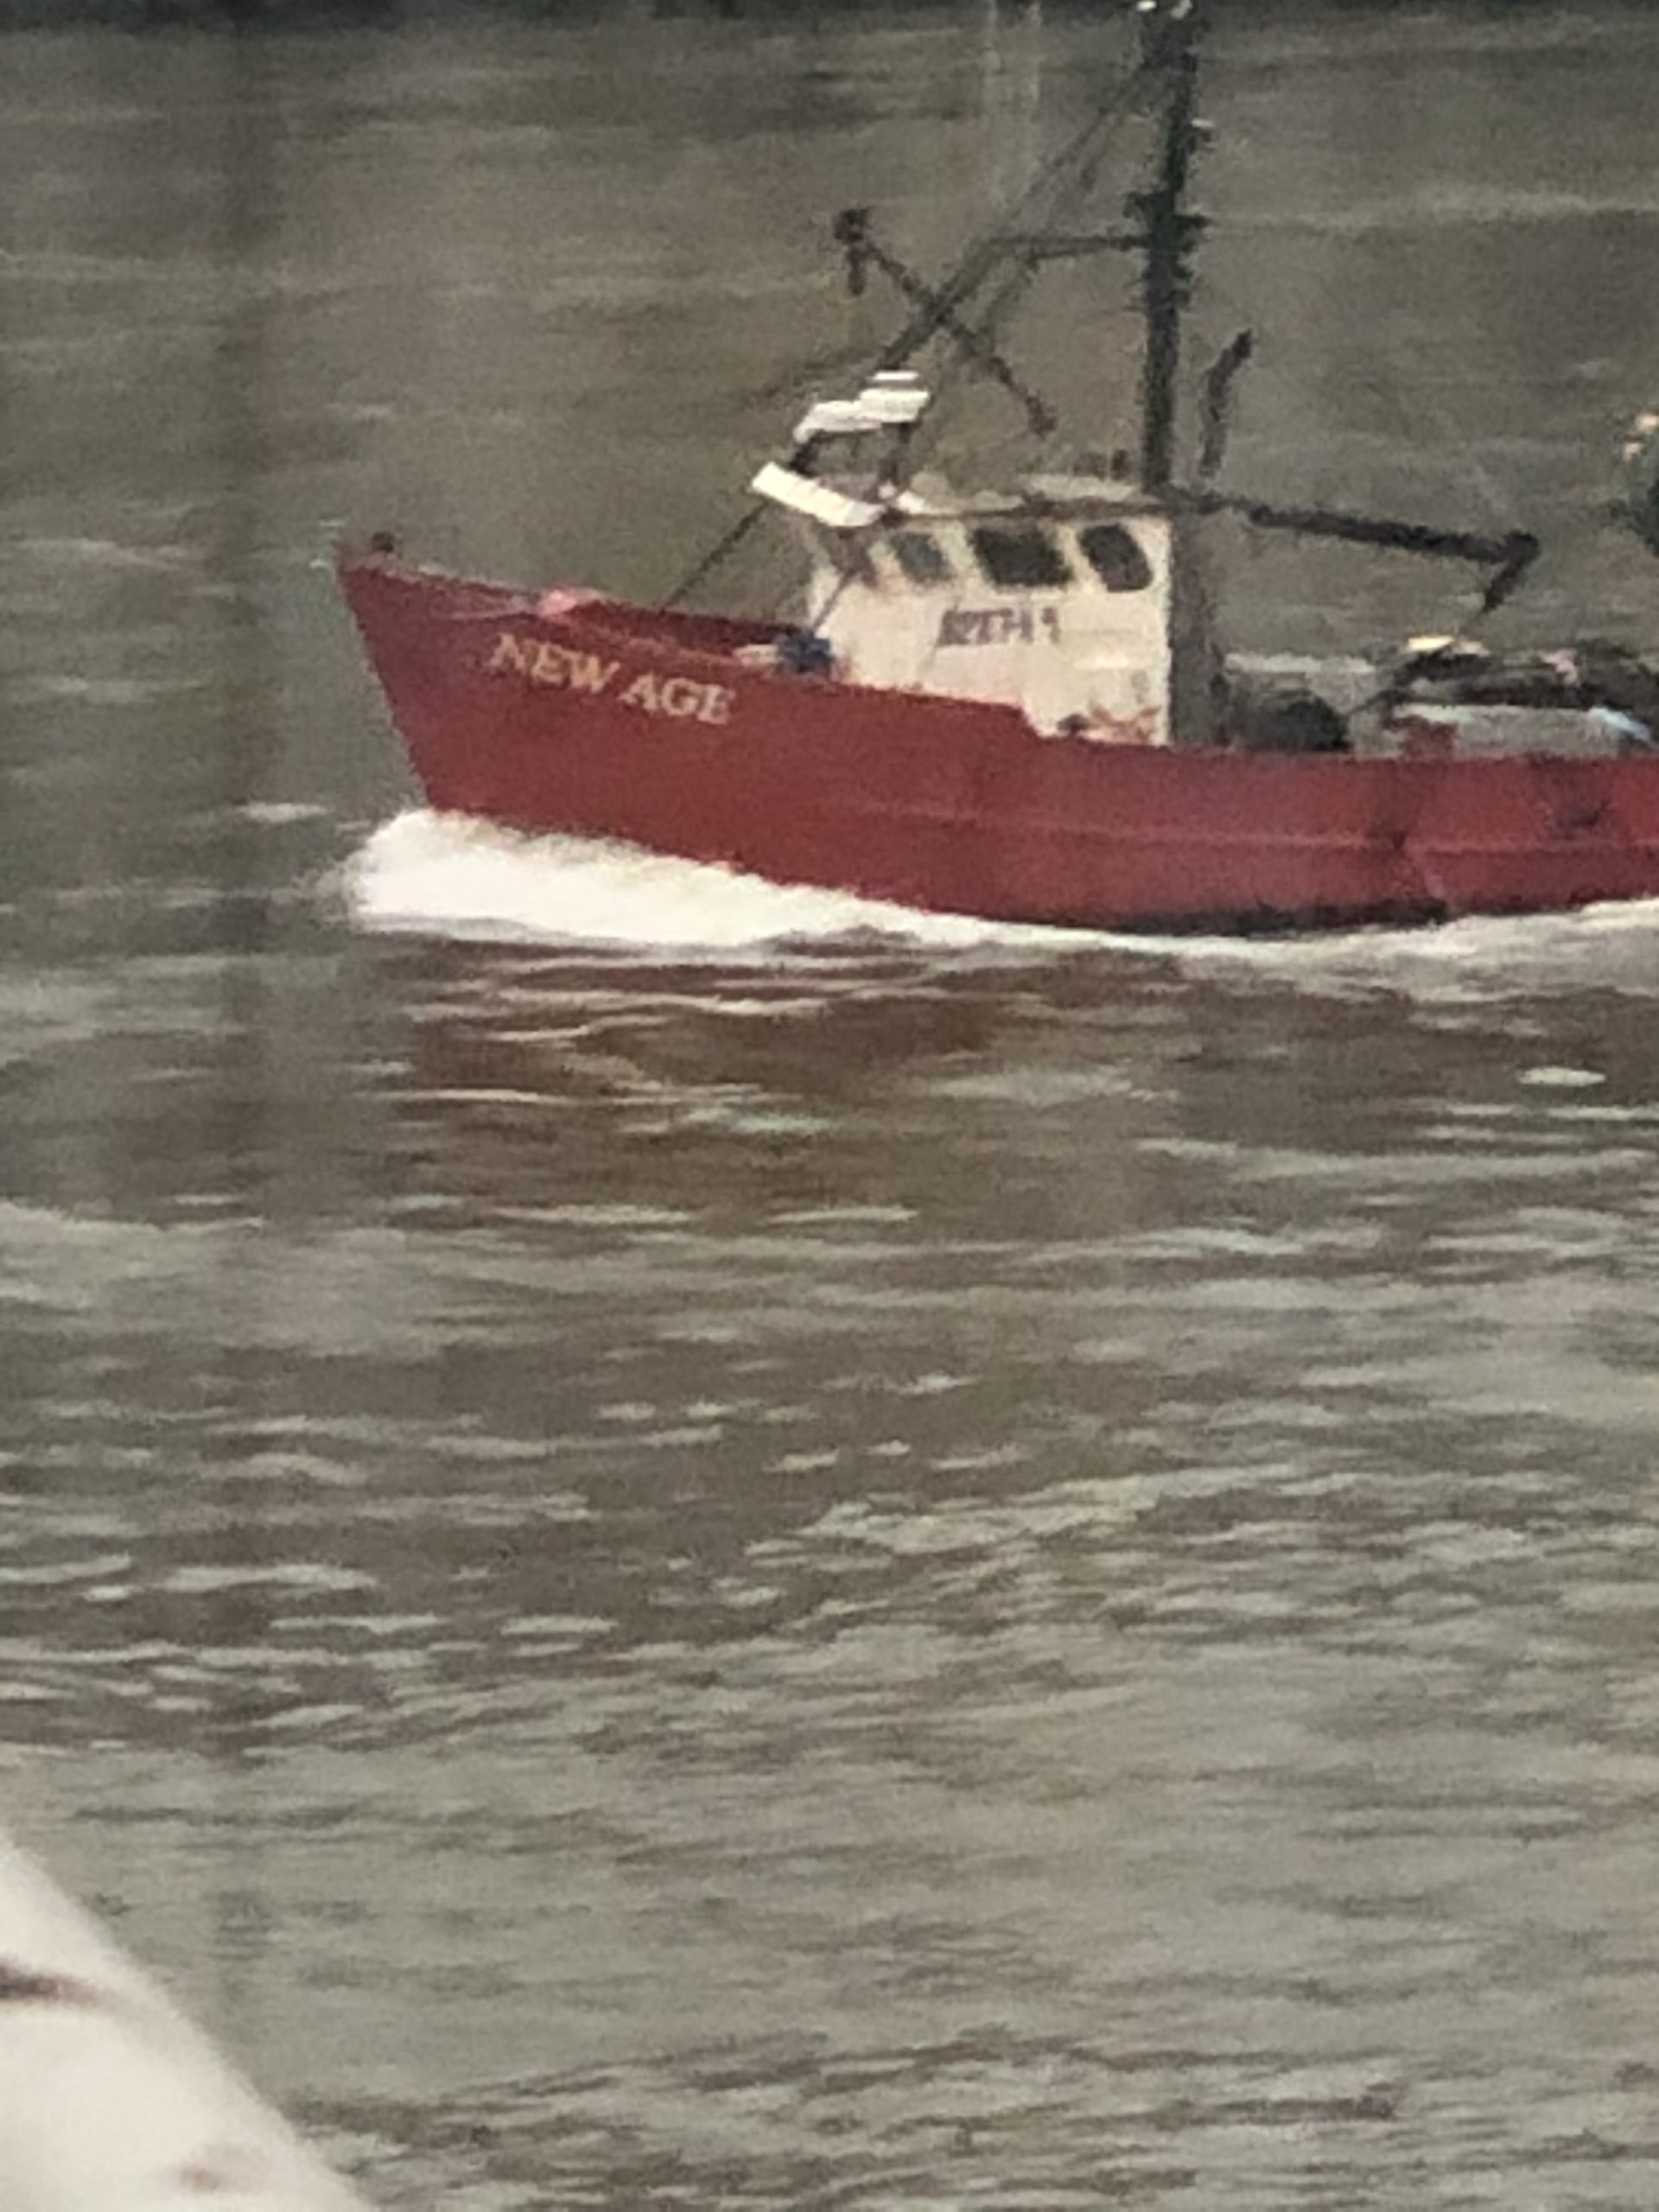 This photo of the New Age steaming up the Hudson River on Thursday, February 13, just a day after its near sinking, was taken by Captain Bob Hallock of the LunaSea II, also out of Montauk, from his room in the Hospital for Special Surgery in New York City, where he was awaiting hip replacement surgery.